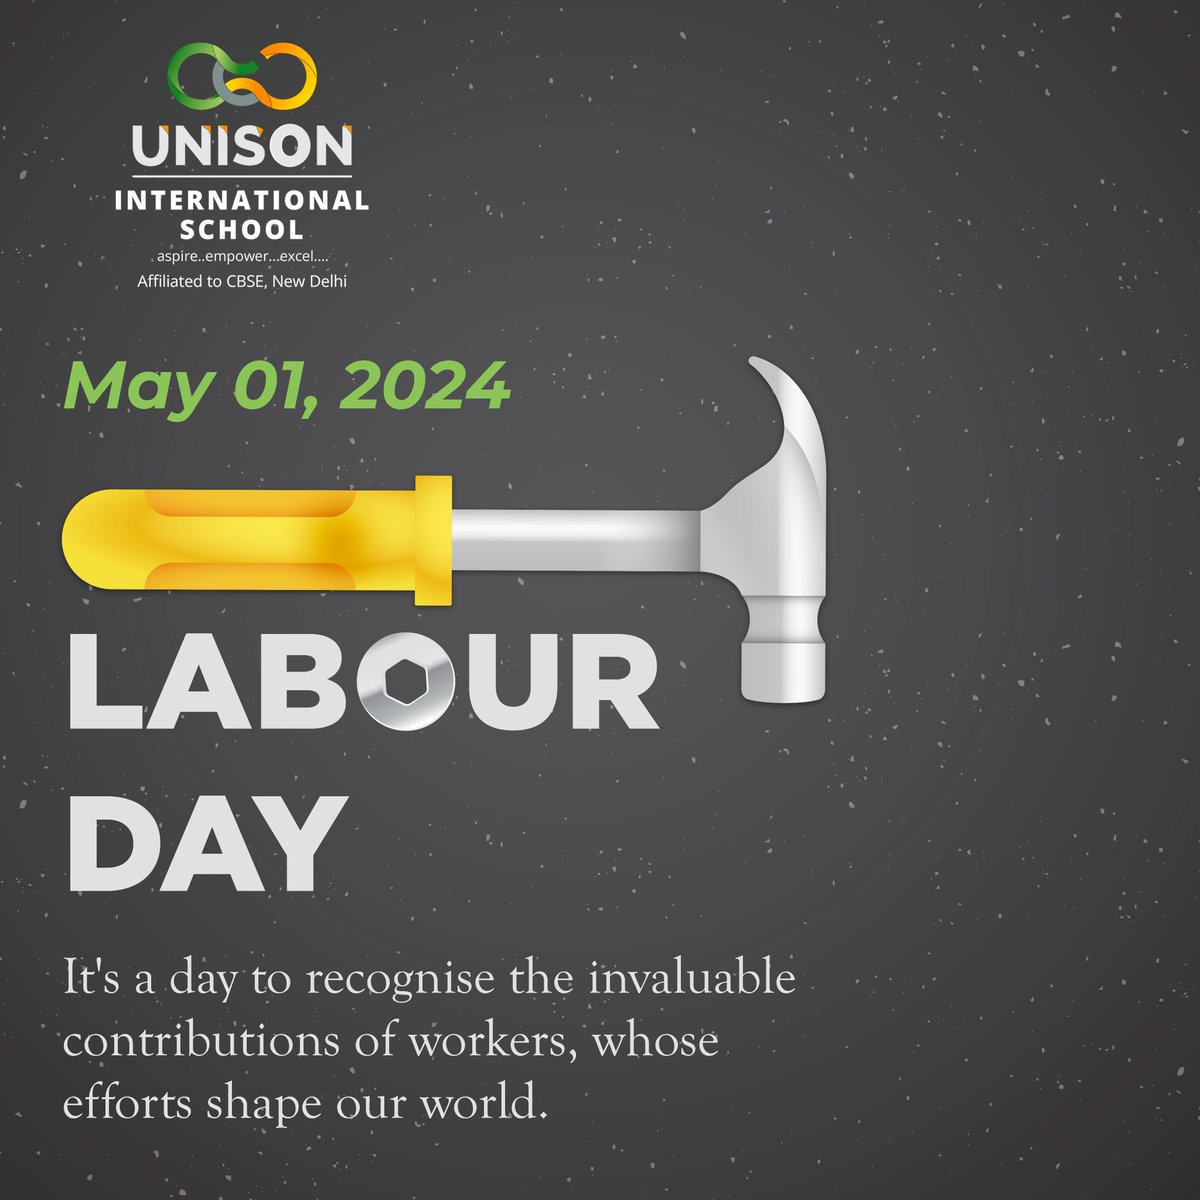 Labour Day is a time to recognise the resilience, dedication, and achievements of workers from all walks of life✨💼

#LabourDay #UnisonInternationalSchool #Excellence #Academics #ExtracurricularActivities #FutureLeaders #CBSESchool #21stCenturyCurriculum #FunLearning